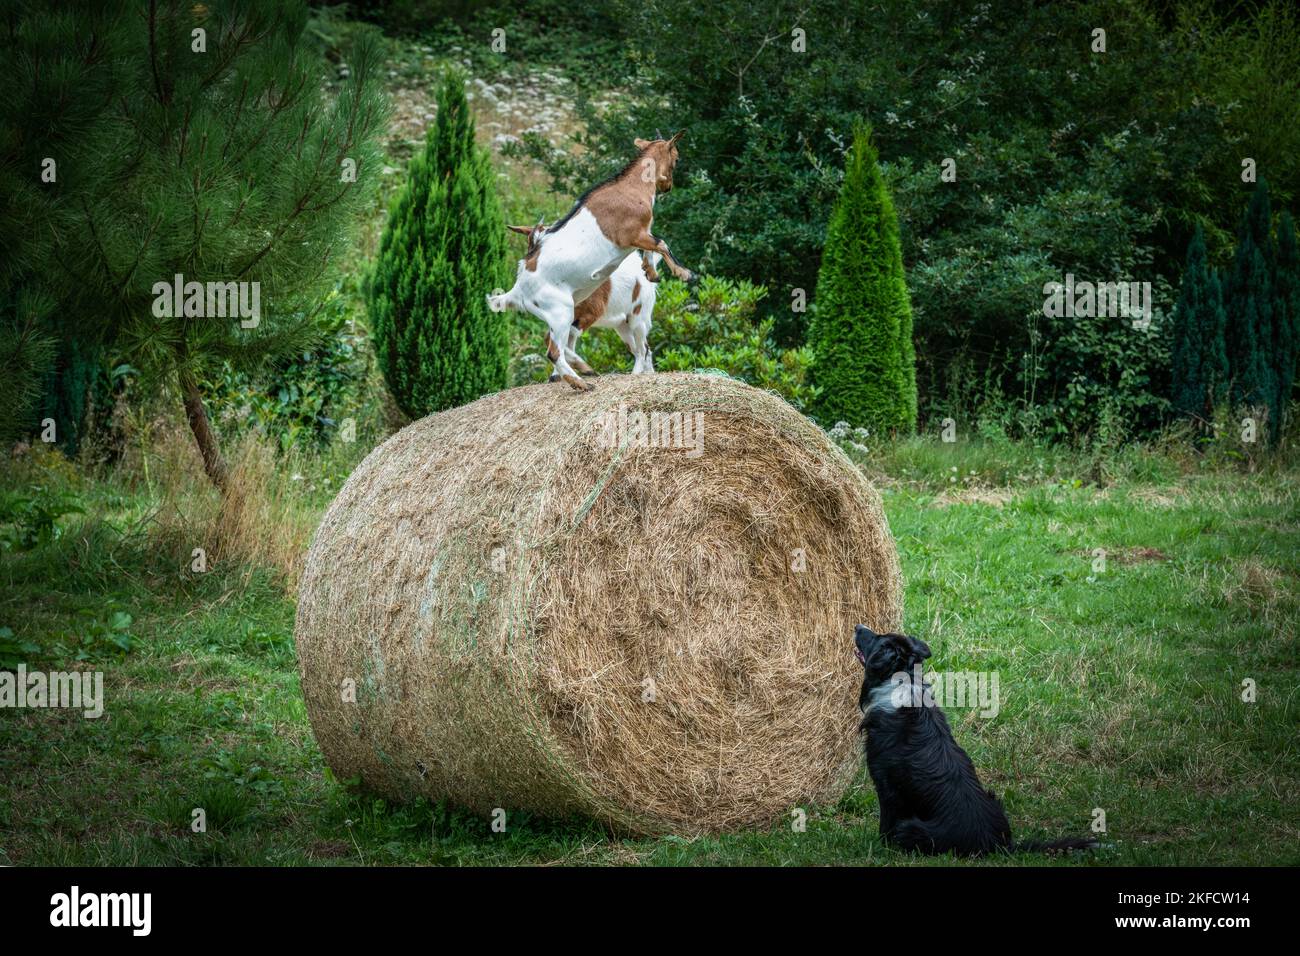 two goats playing on a straw roll in a field in front of a dog watching them Stock Photo